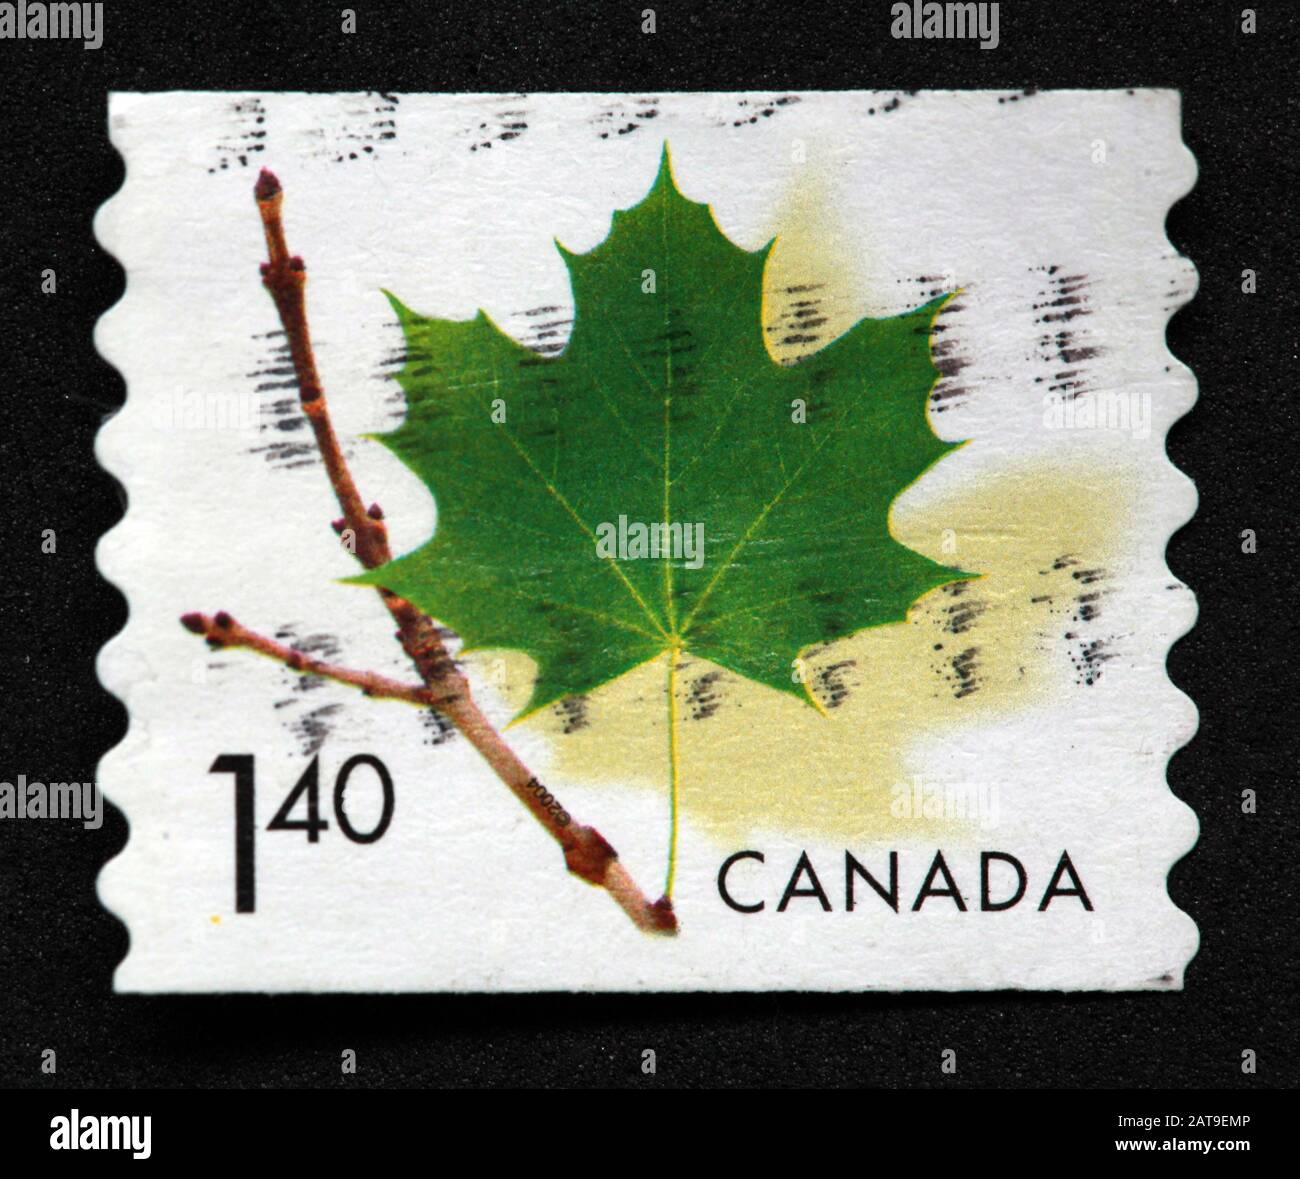 Canadian Stamp, Canada Stamp, Canada Post,used stamp, Canada 1.40, maple leaf,maple tree Stock Photo